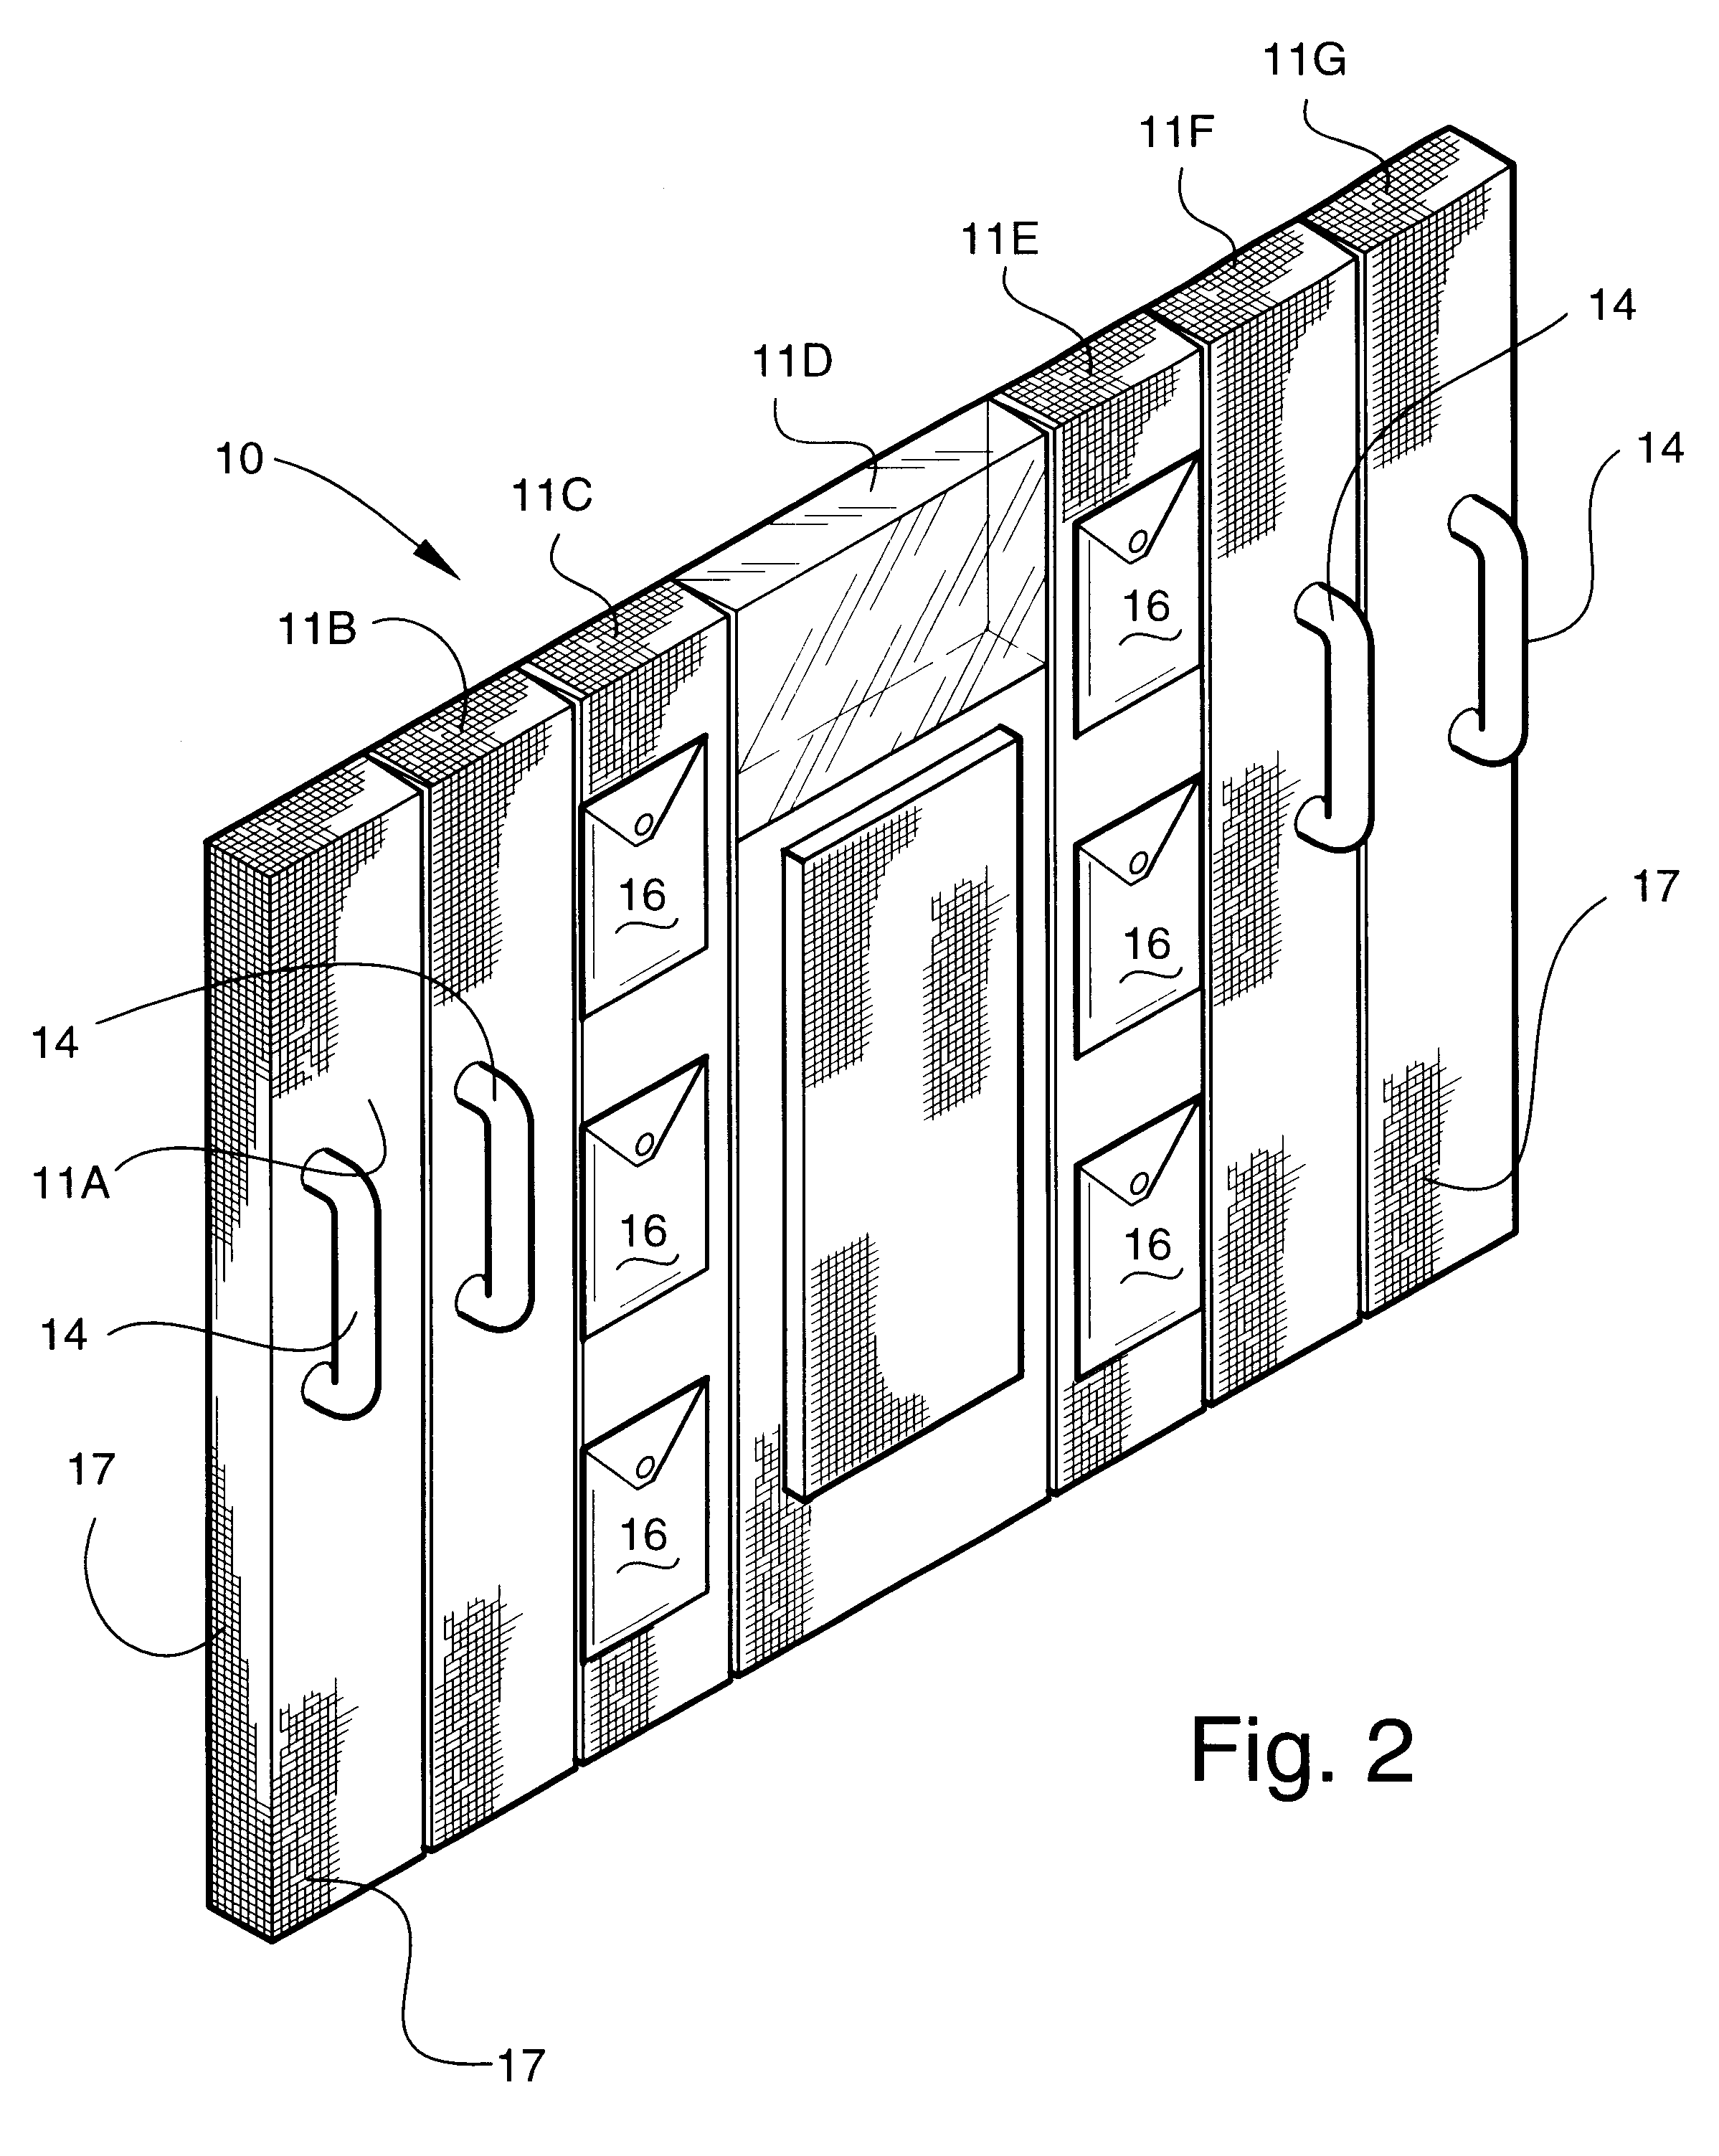 Physical restraining pad assembly and system